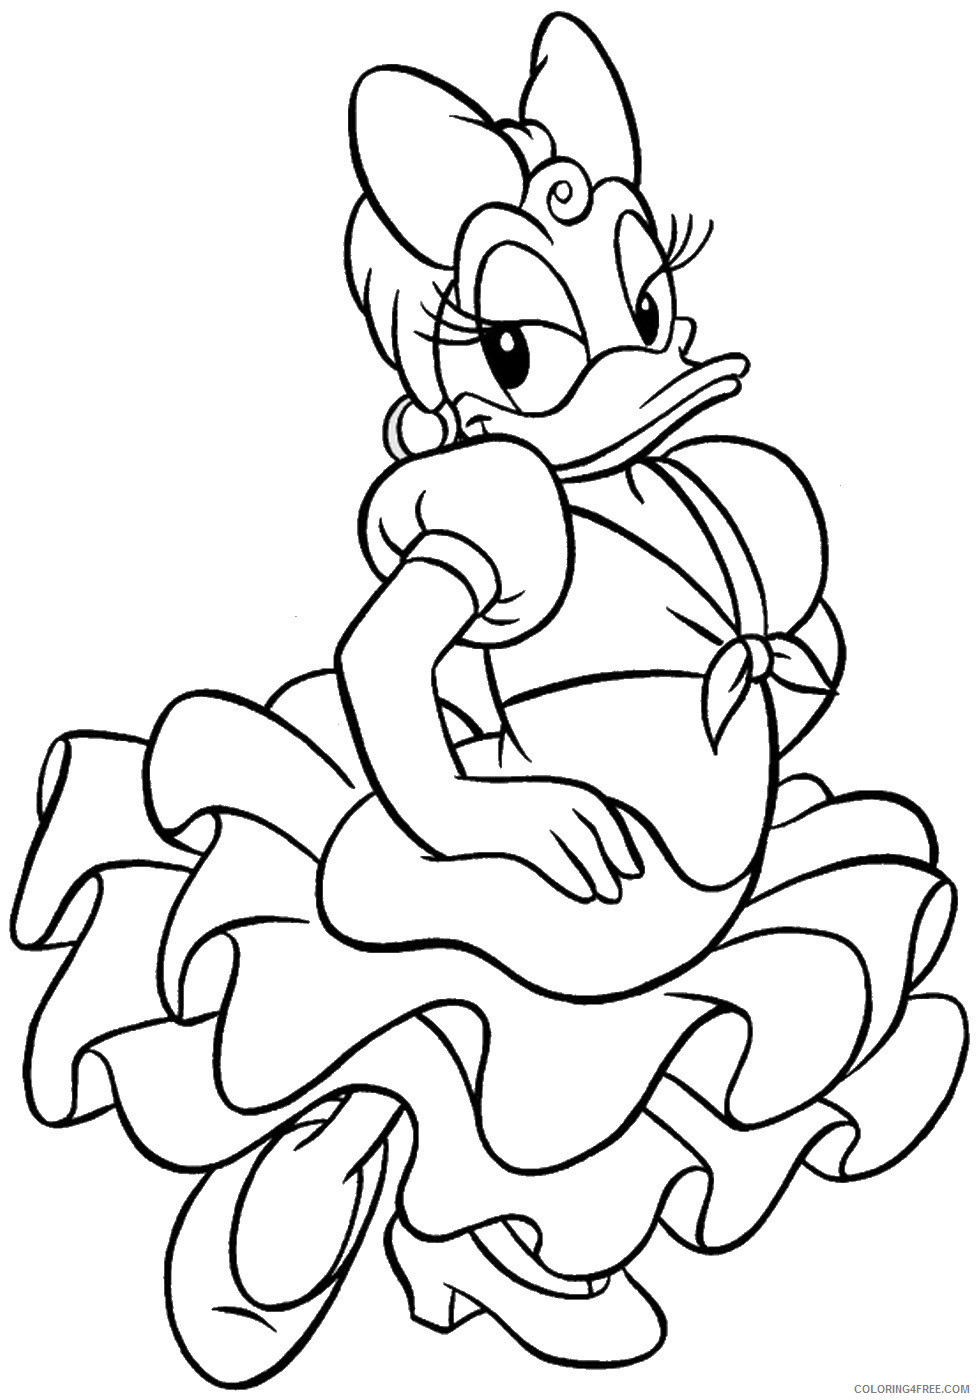 Daisy Duck Coloring Pages Cartoons donald_06 Printable 2020 2016 Coloring4free